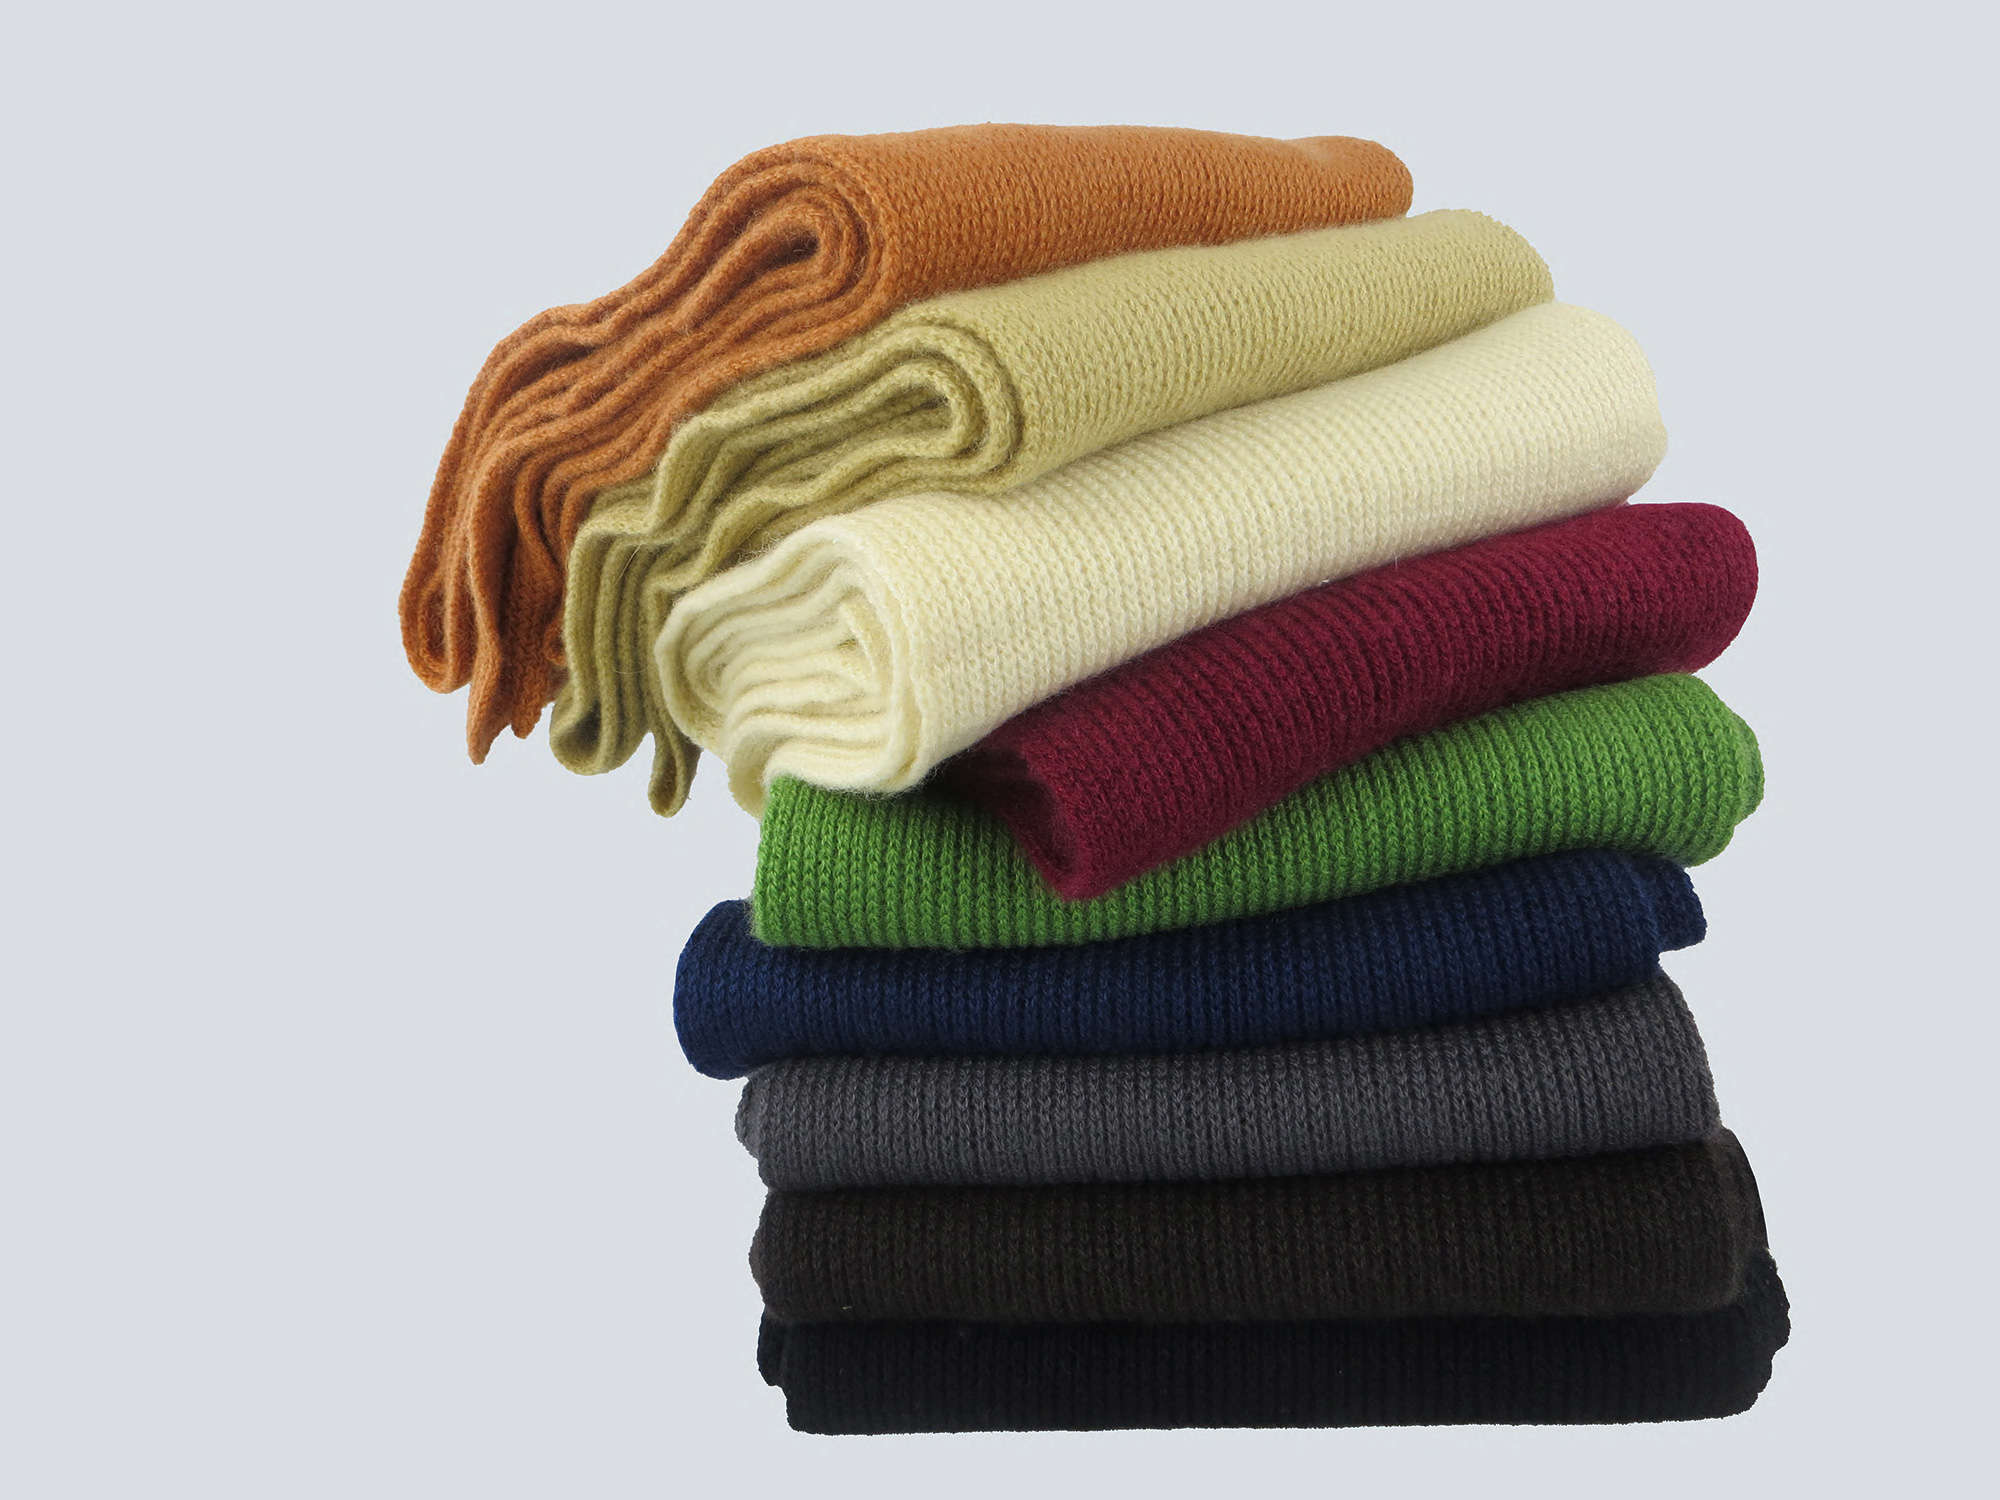 Men's Cashmere Scarves are Welcome Gifts for Valentine's Day.